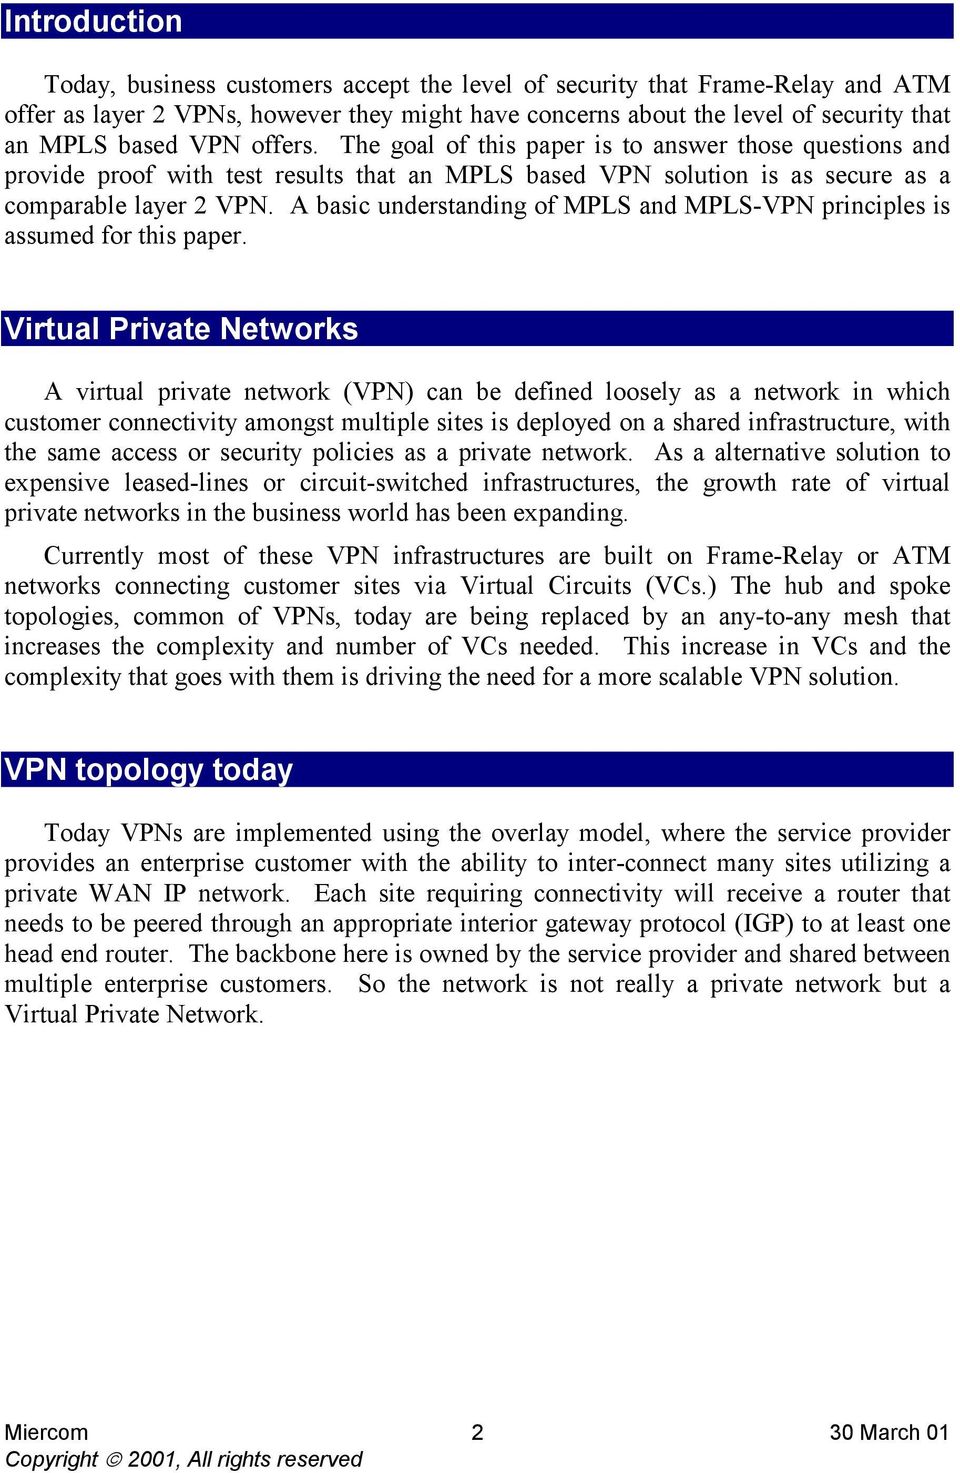 A basic understanding of MPLS and MPLS-VPN principles is assumed for this paper.